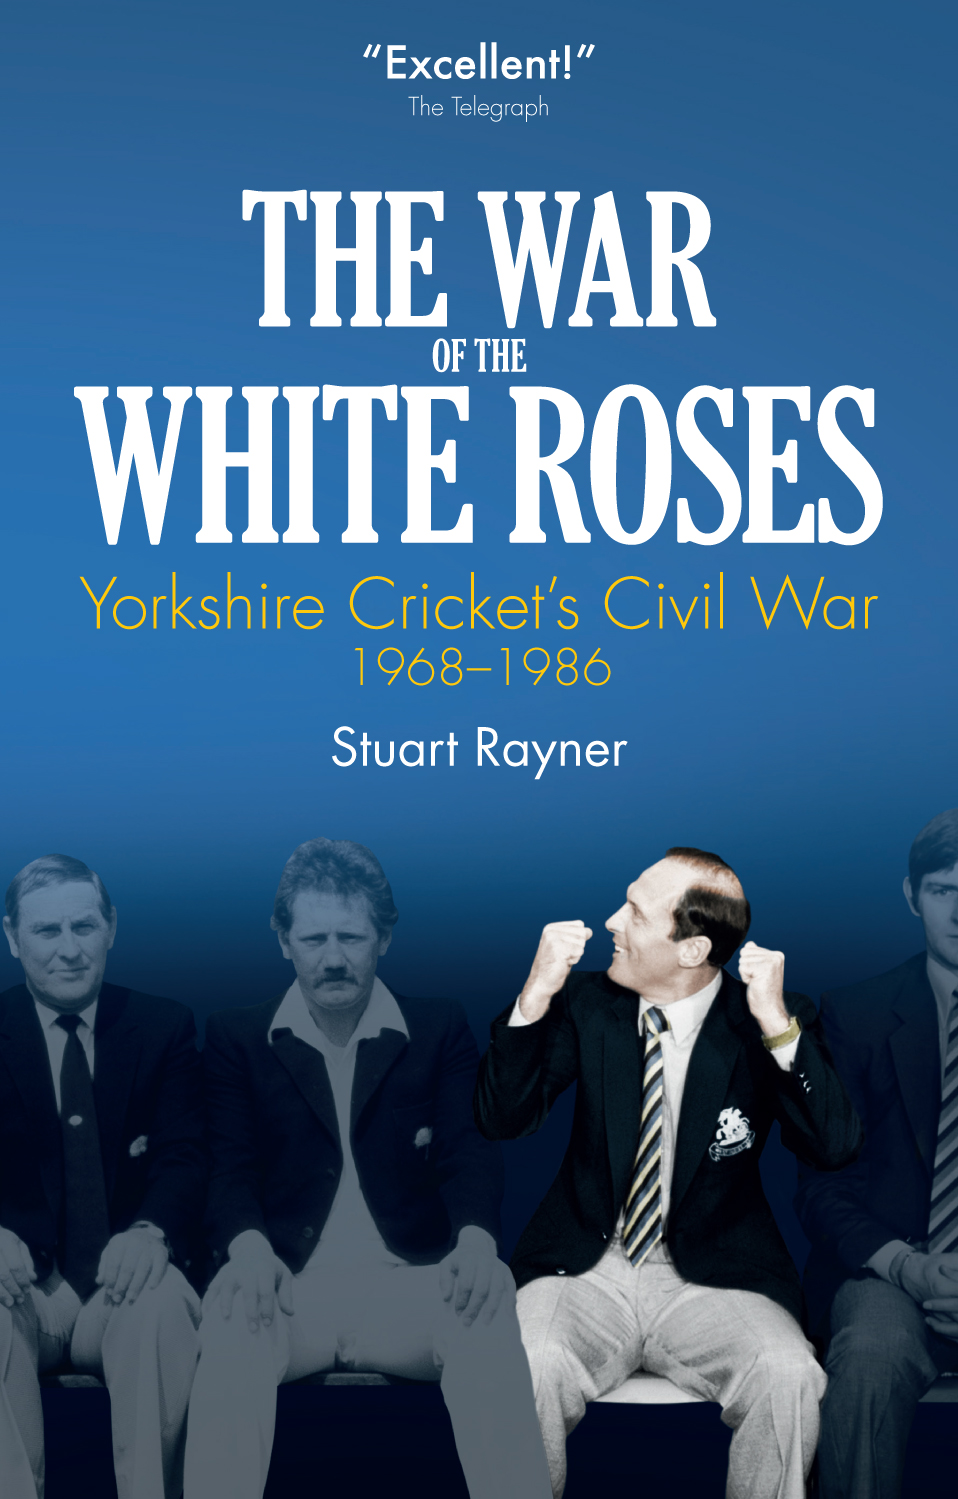 The War of the White Roses